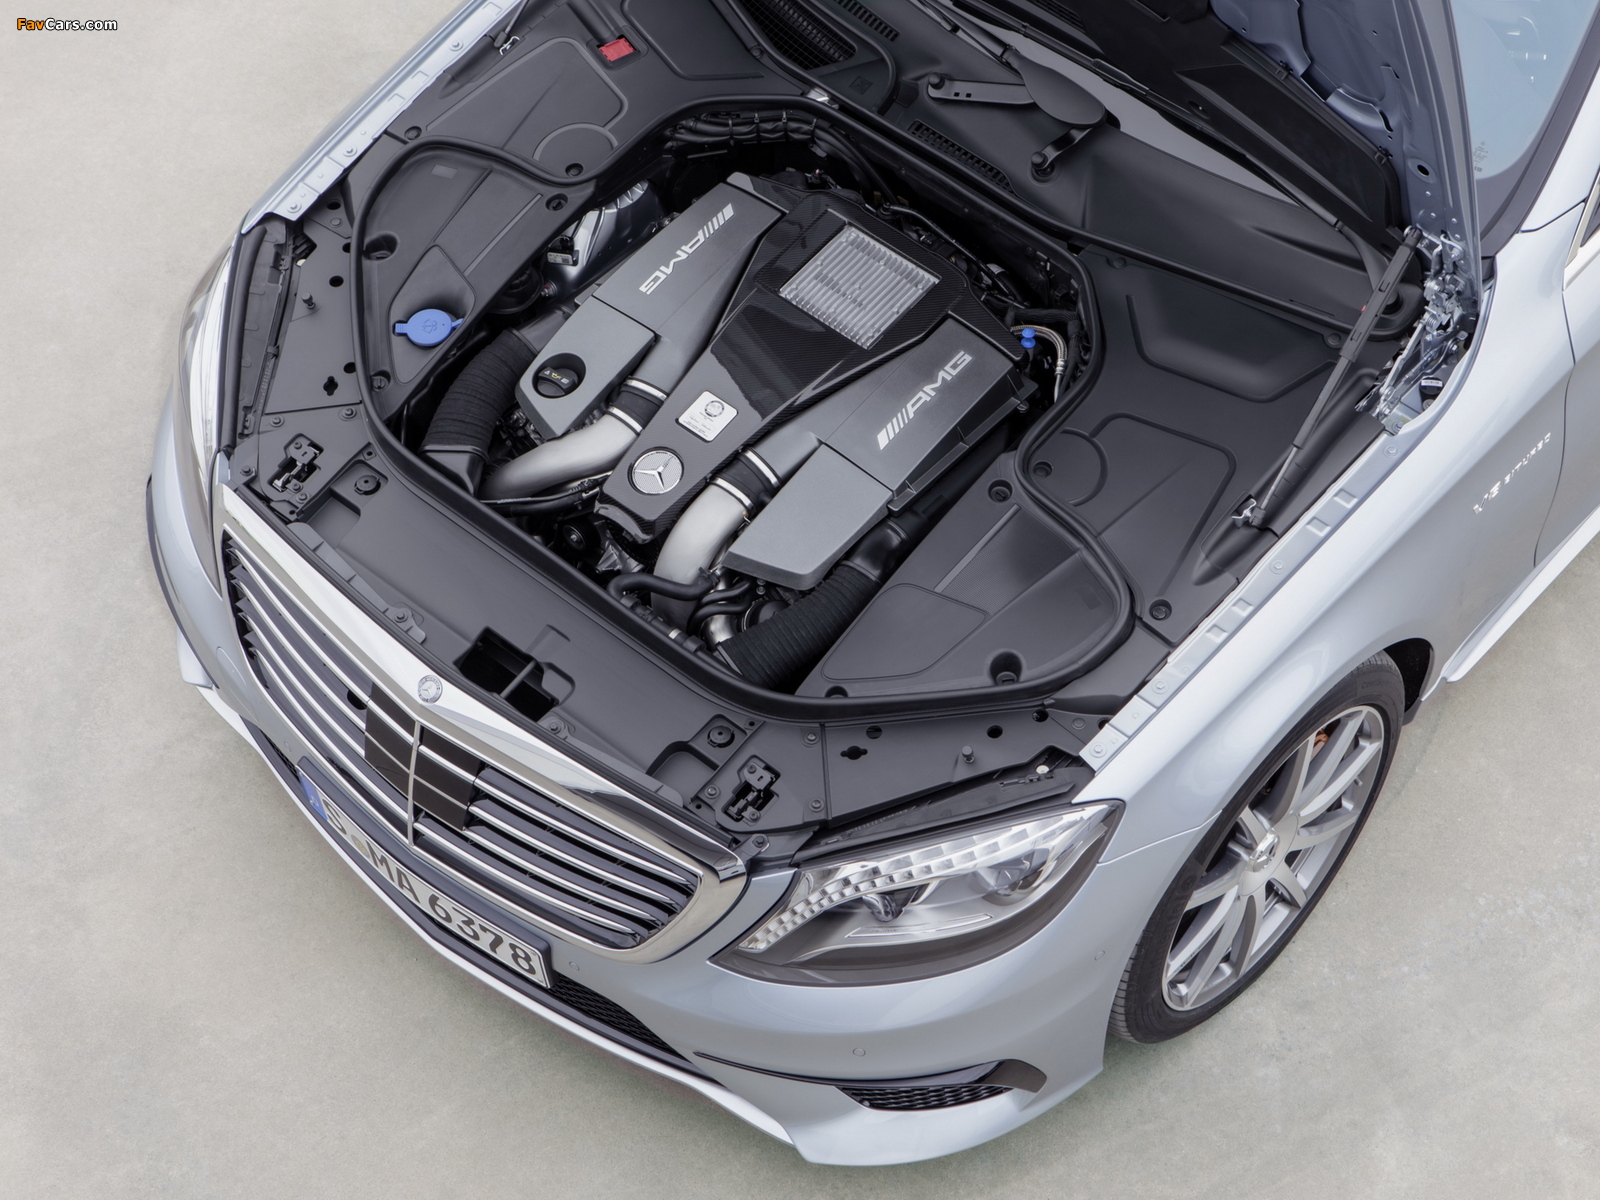 Mercedes-Benz S 63 AMG (W222) 2013 pictures (1600 x 1200)